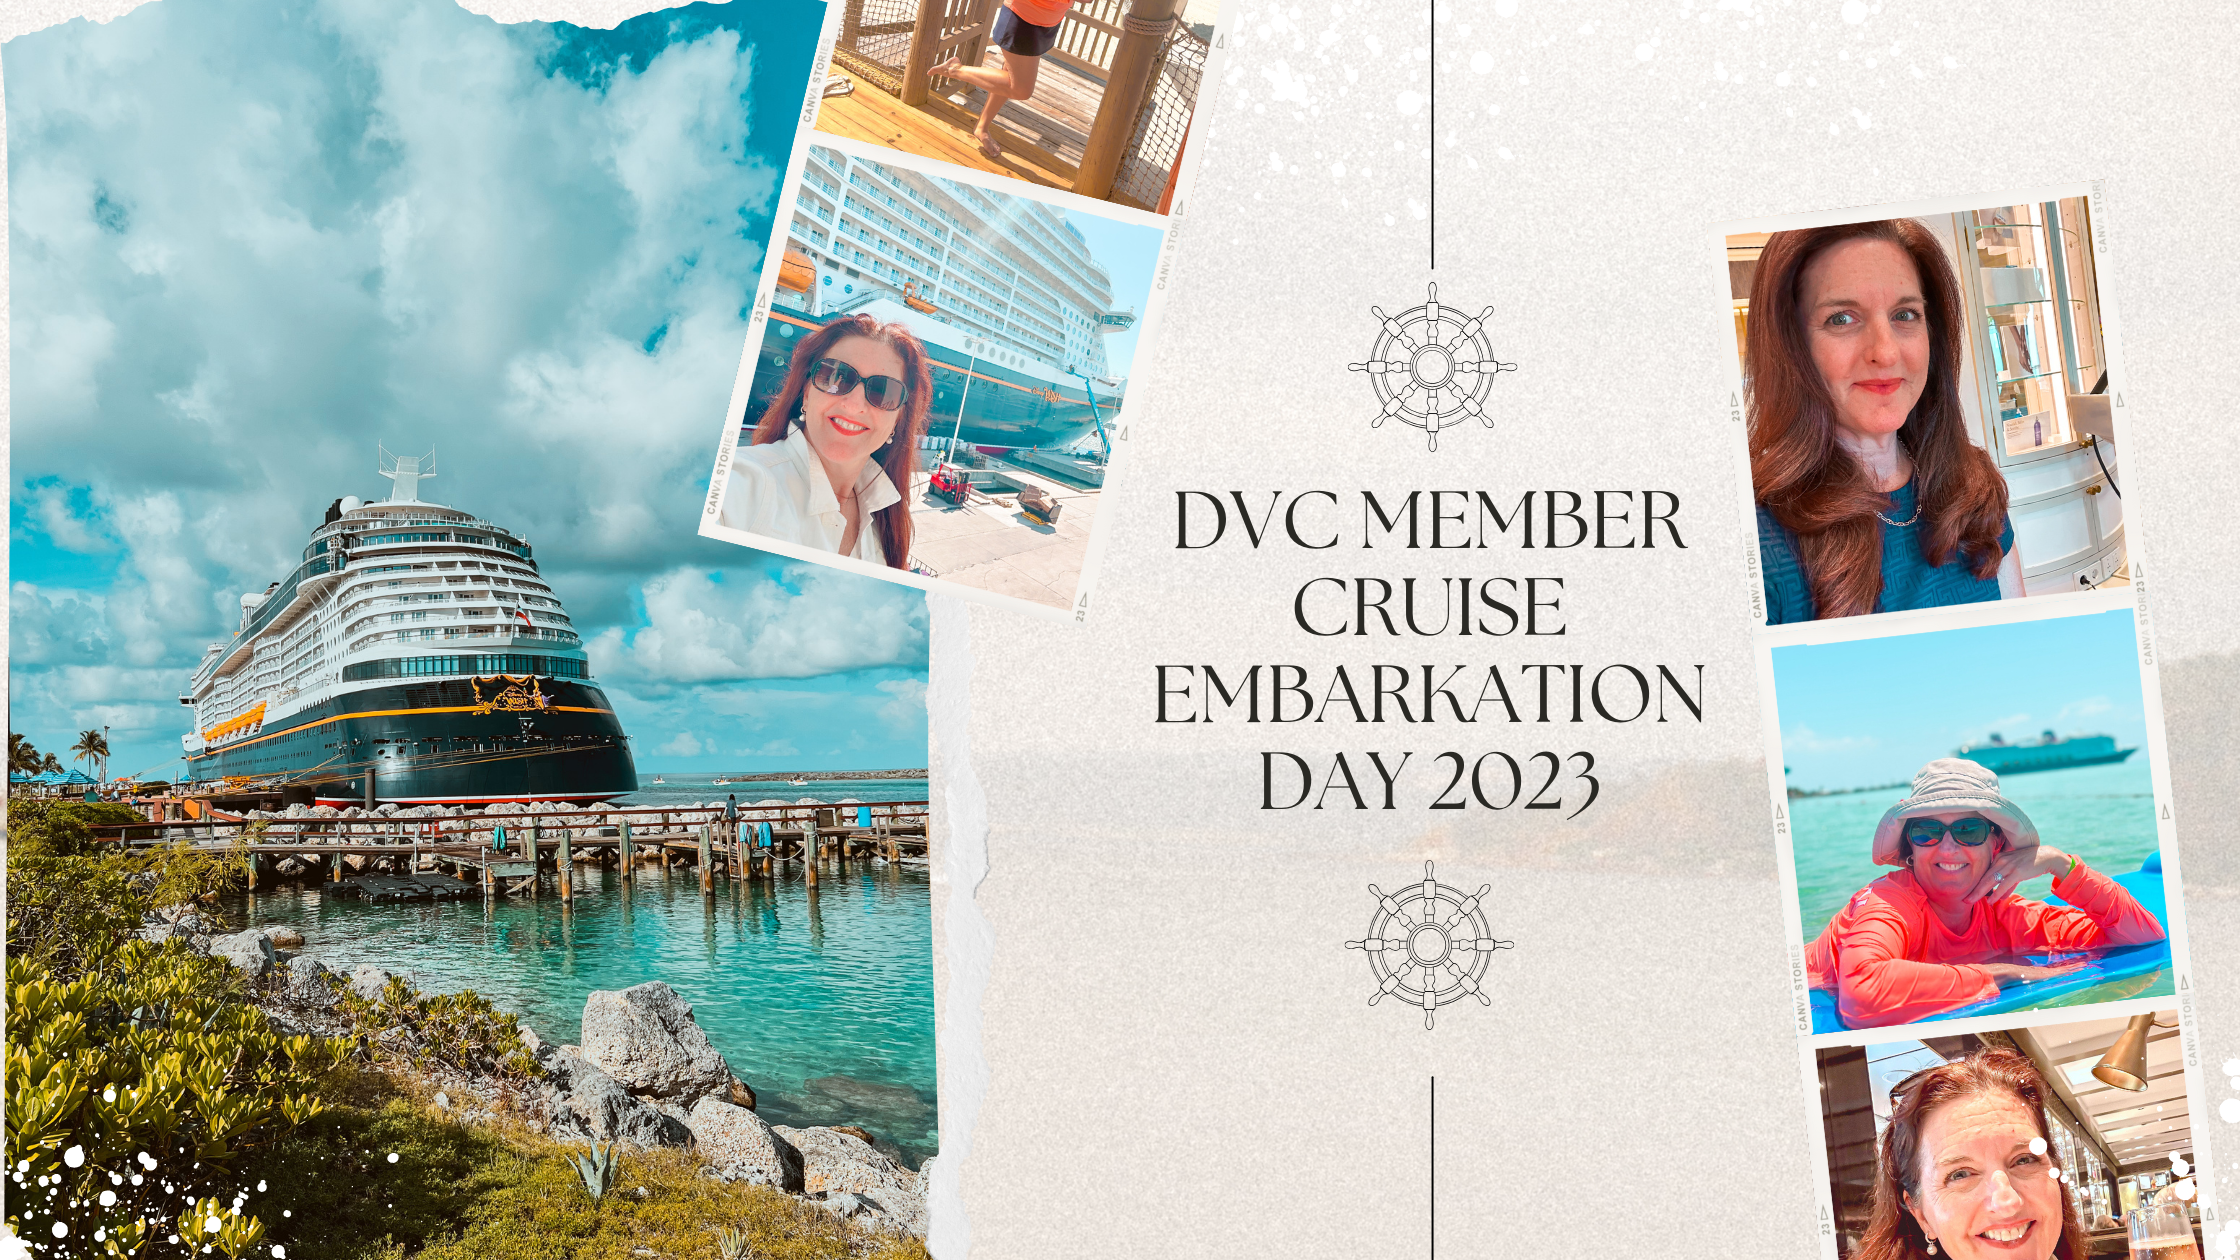 DVC Disney Cruise Line Embarkation Day 2023